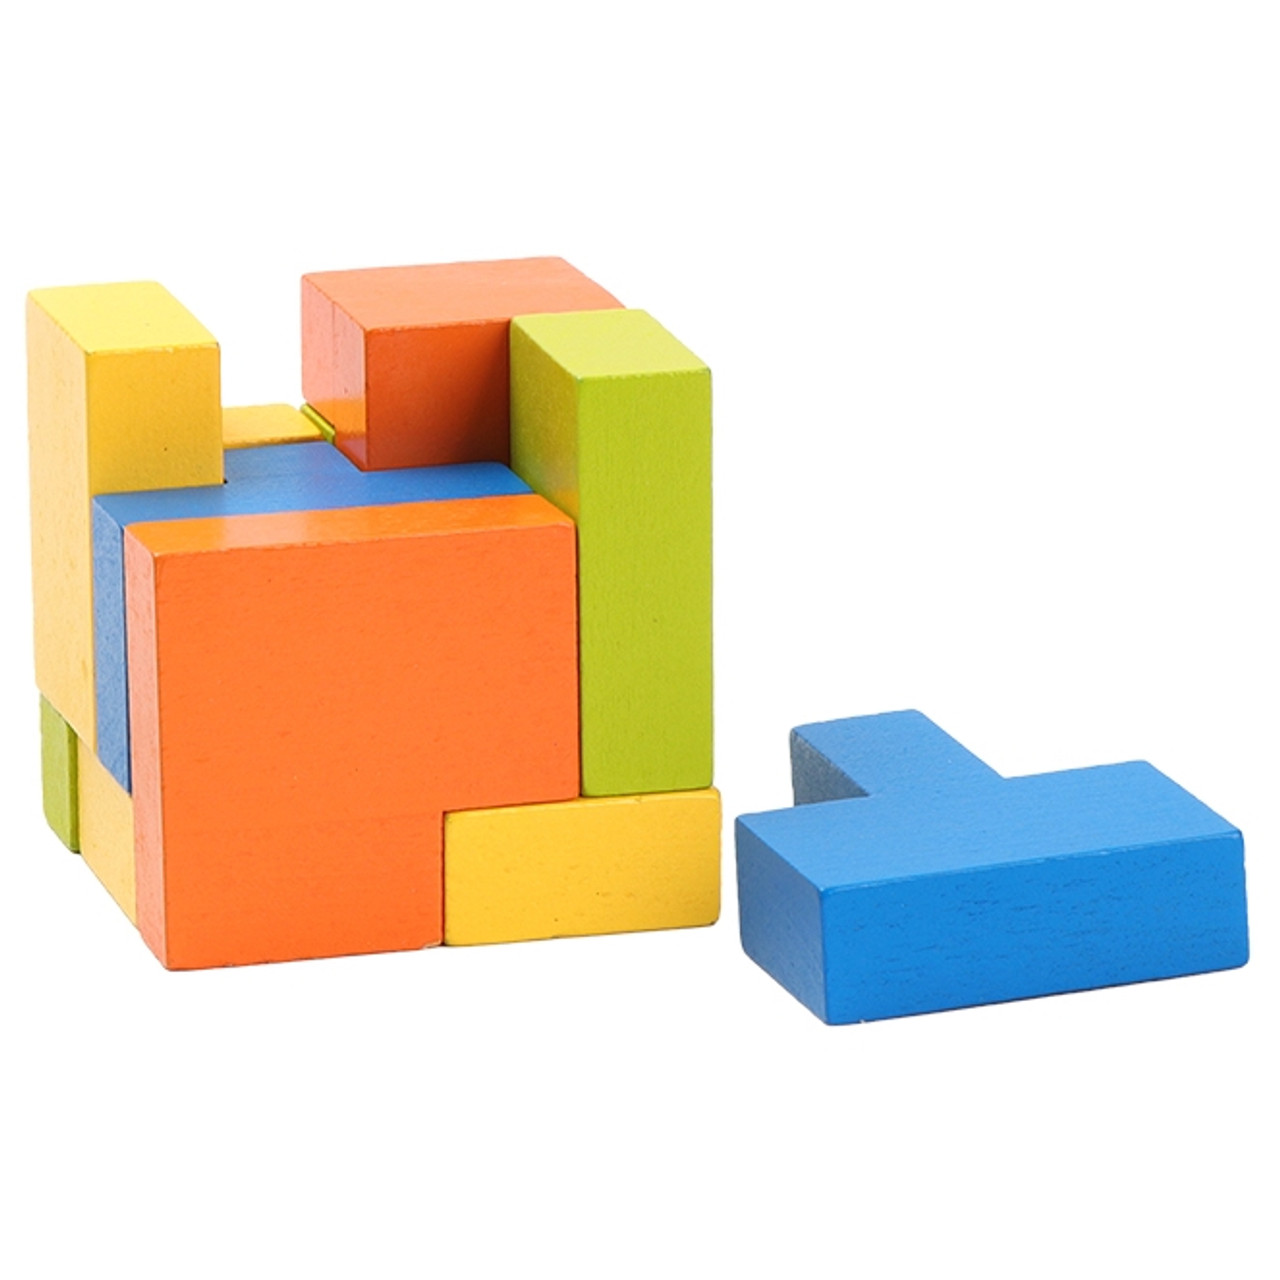 Wood Block Puzzle - Just like Tetris, but different